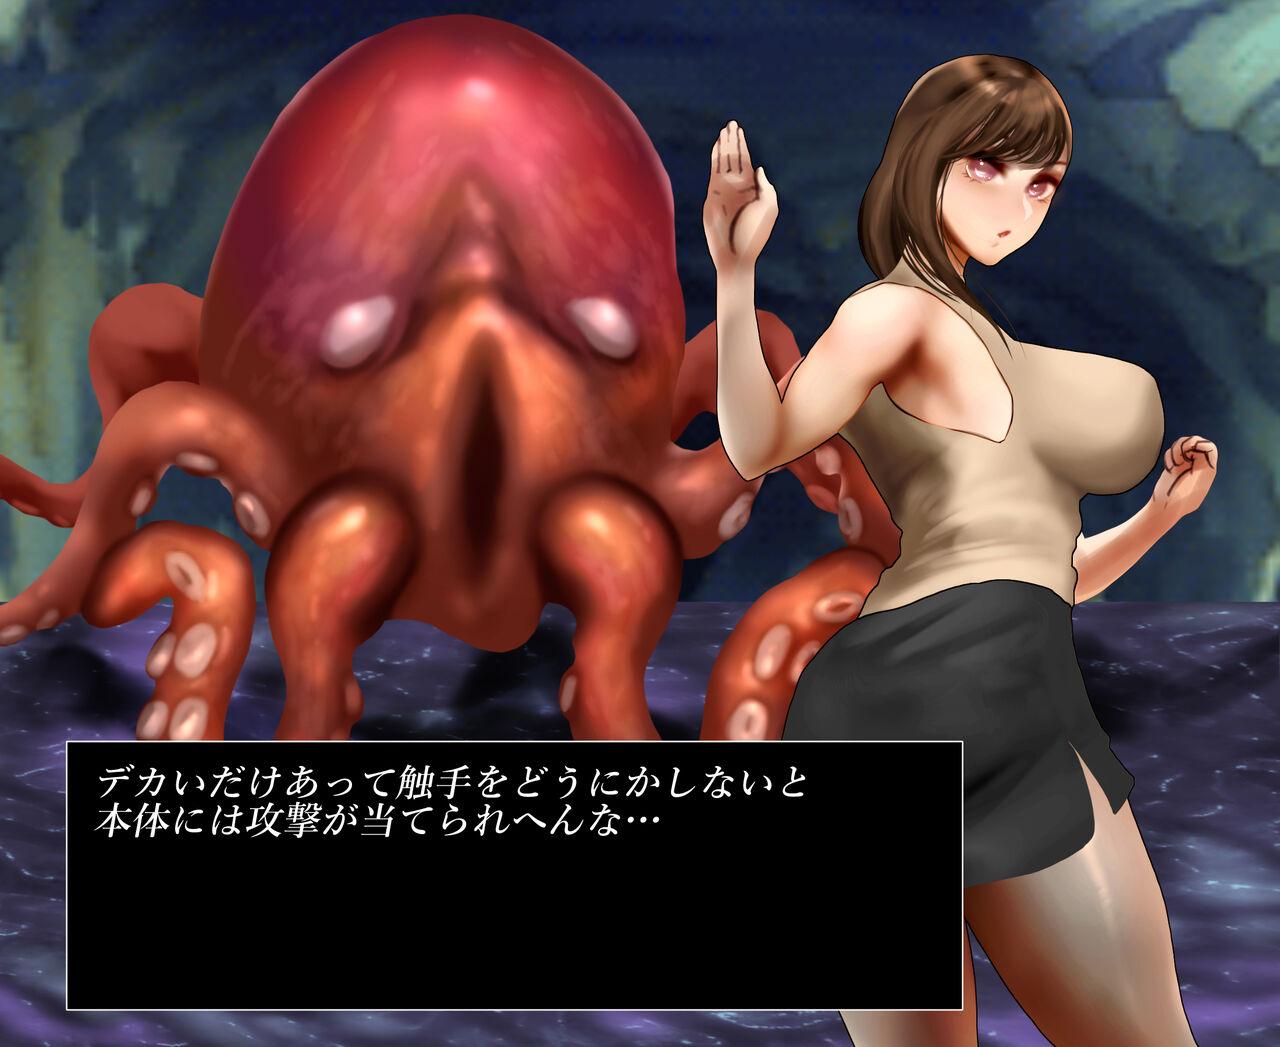 Office lady and octopus 32